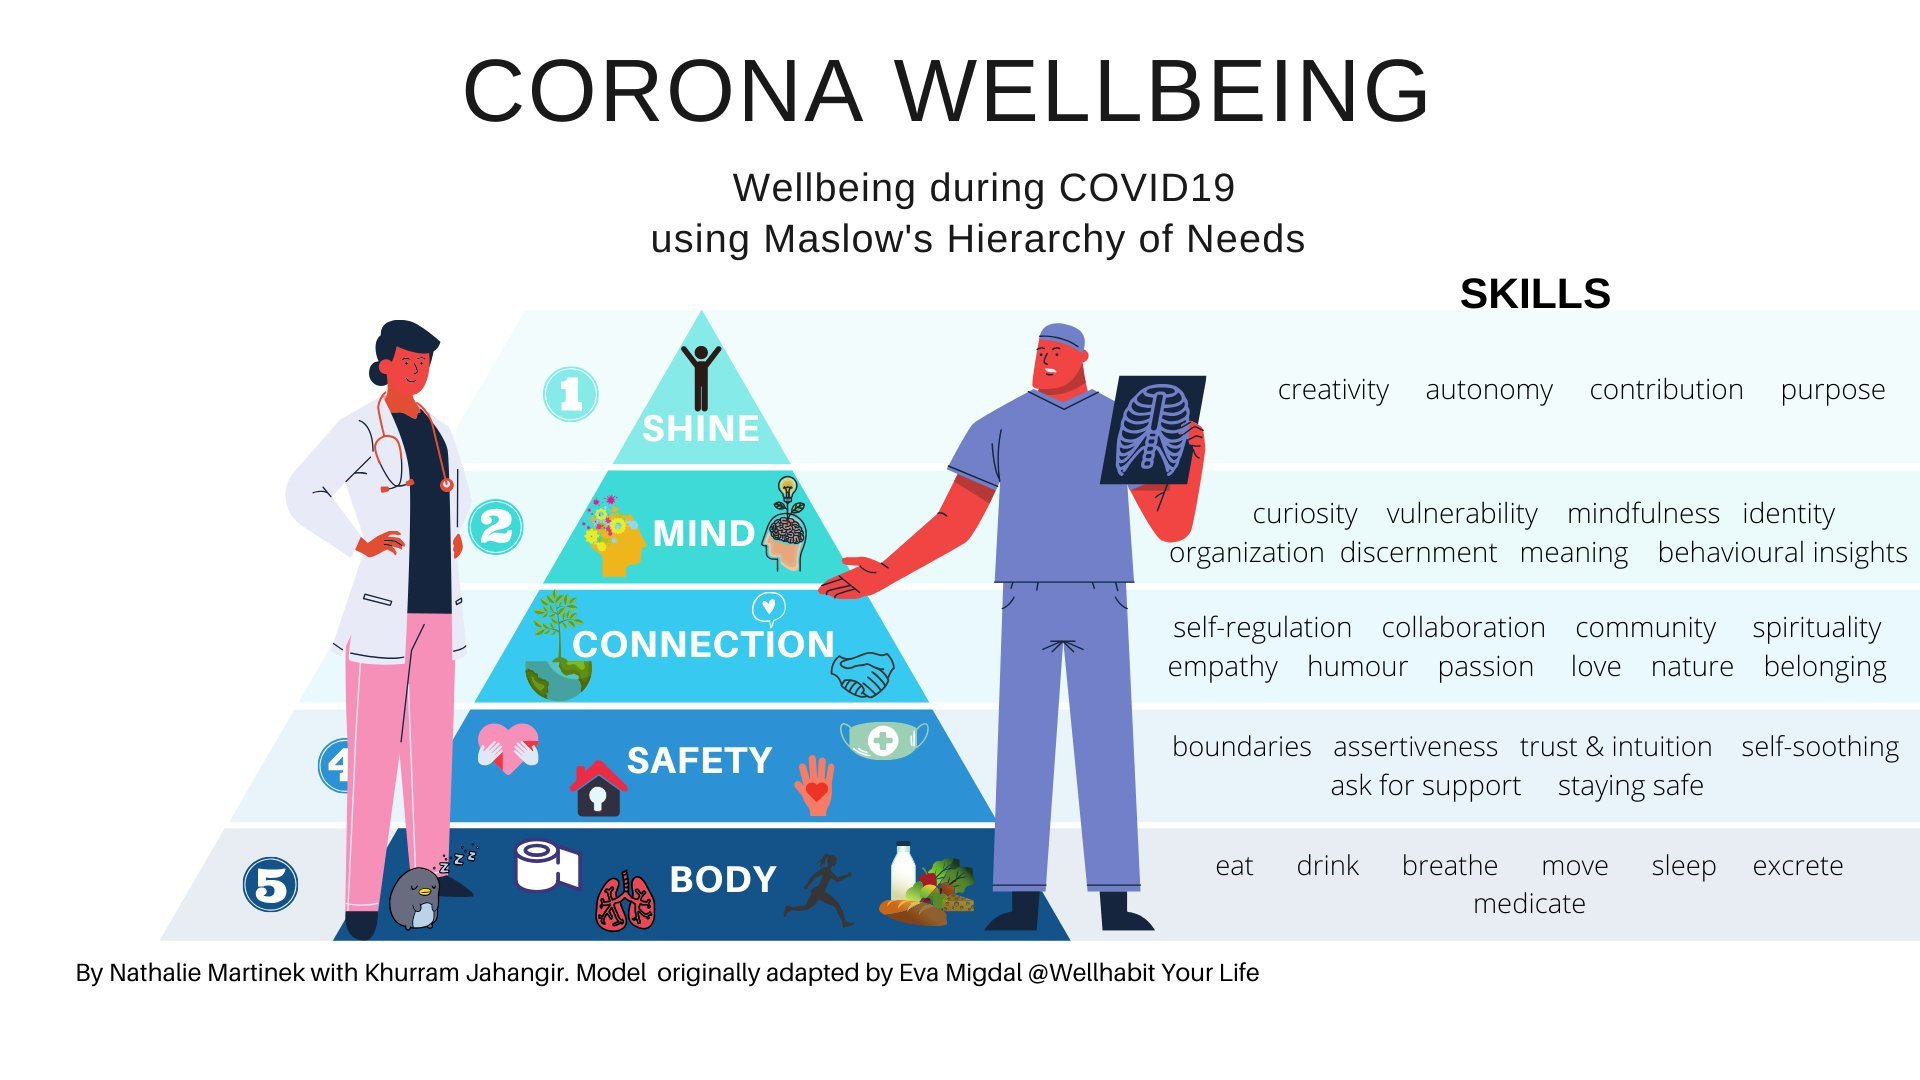 Wellbeing During COVID-19, Symbolized Through Maslow's Hierarchy of Needs